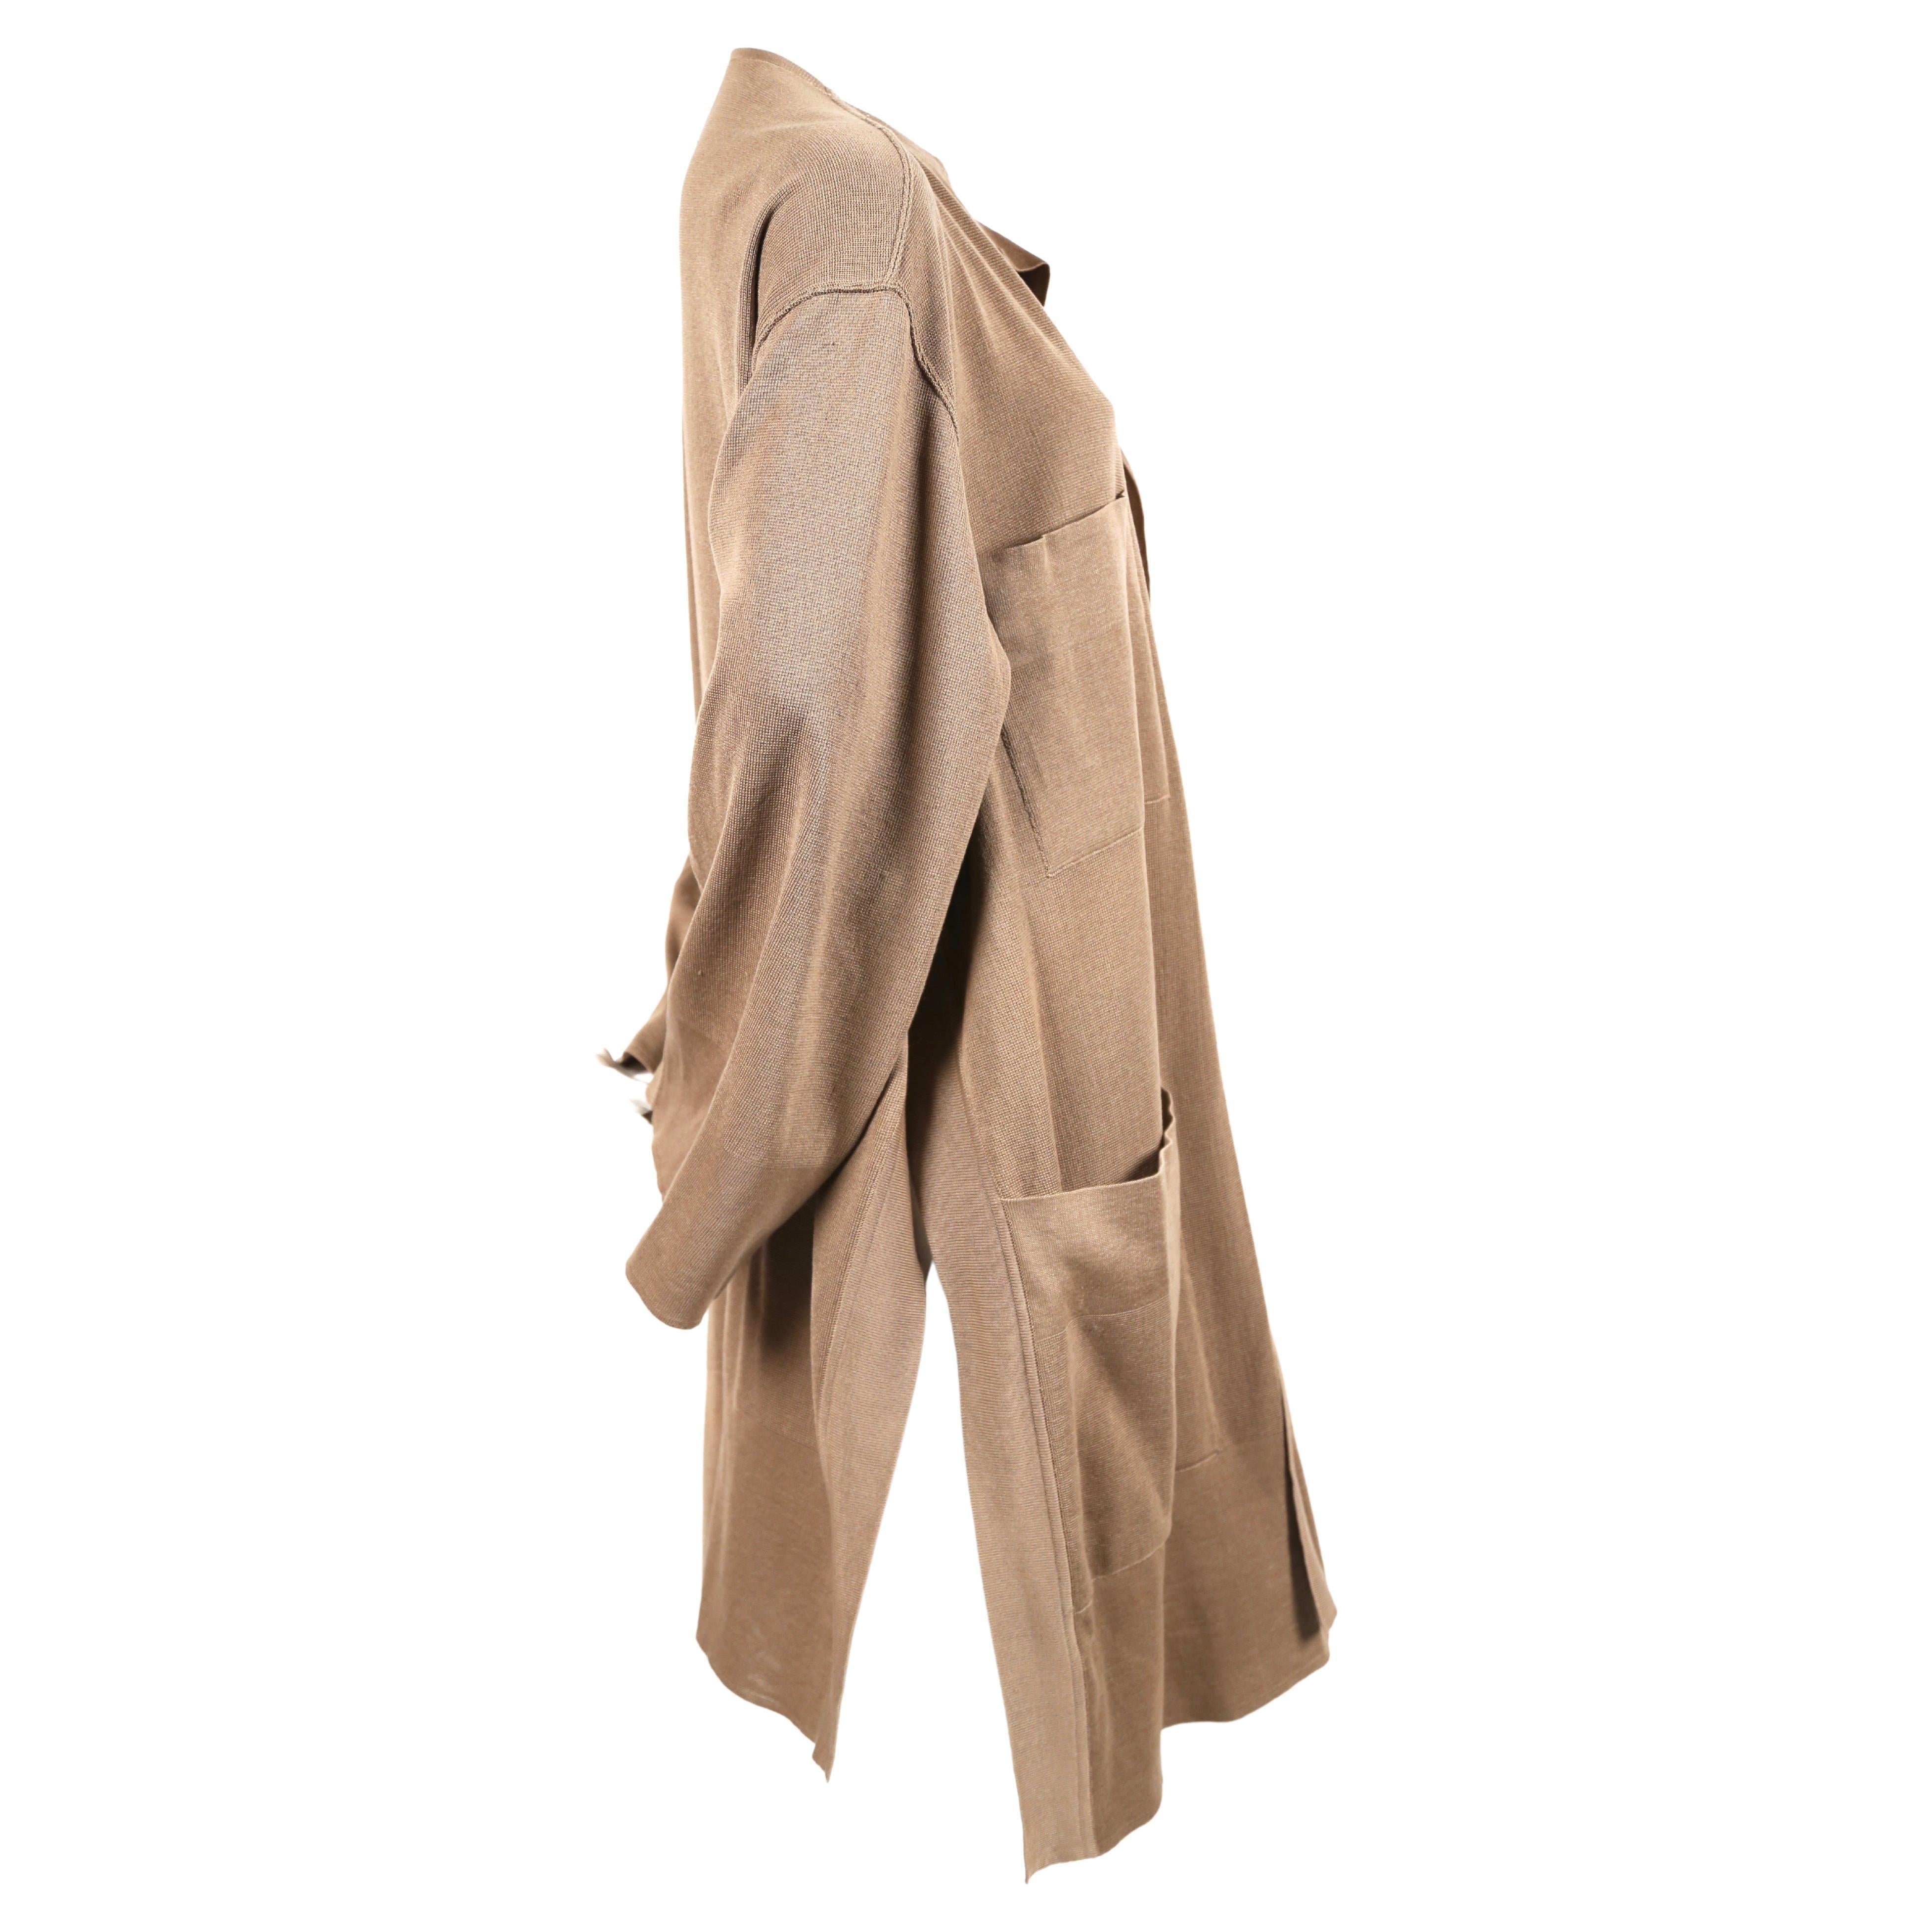 1985 AZZEDINE ALAIA oversized tan cardigan sweater coat with pockets In Good Condition For Sale In San Fransisco, CA